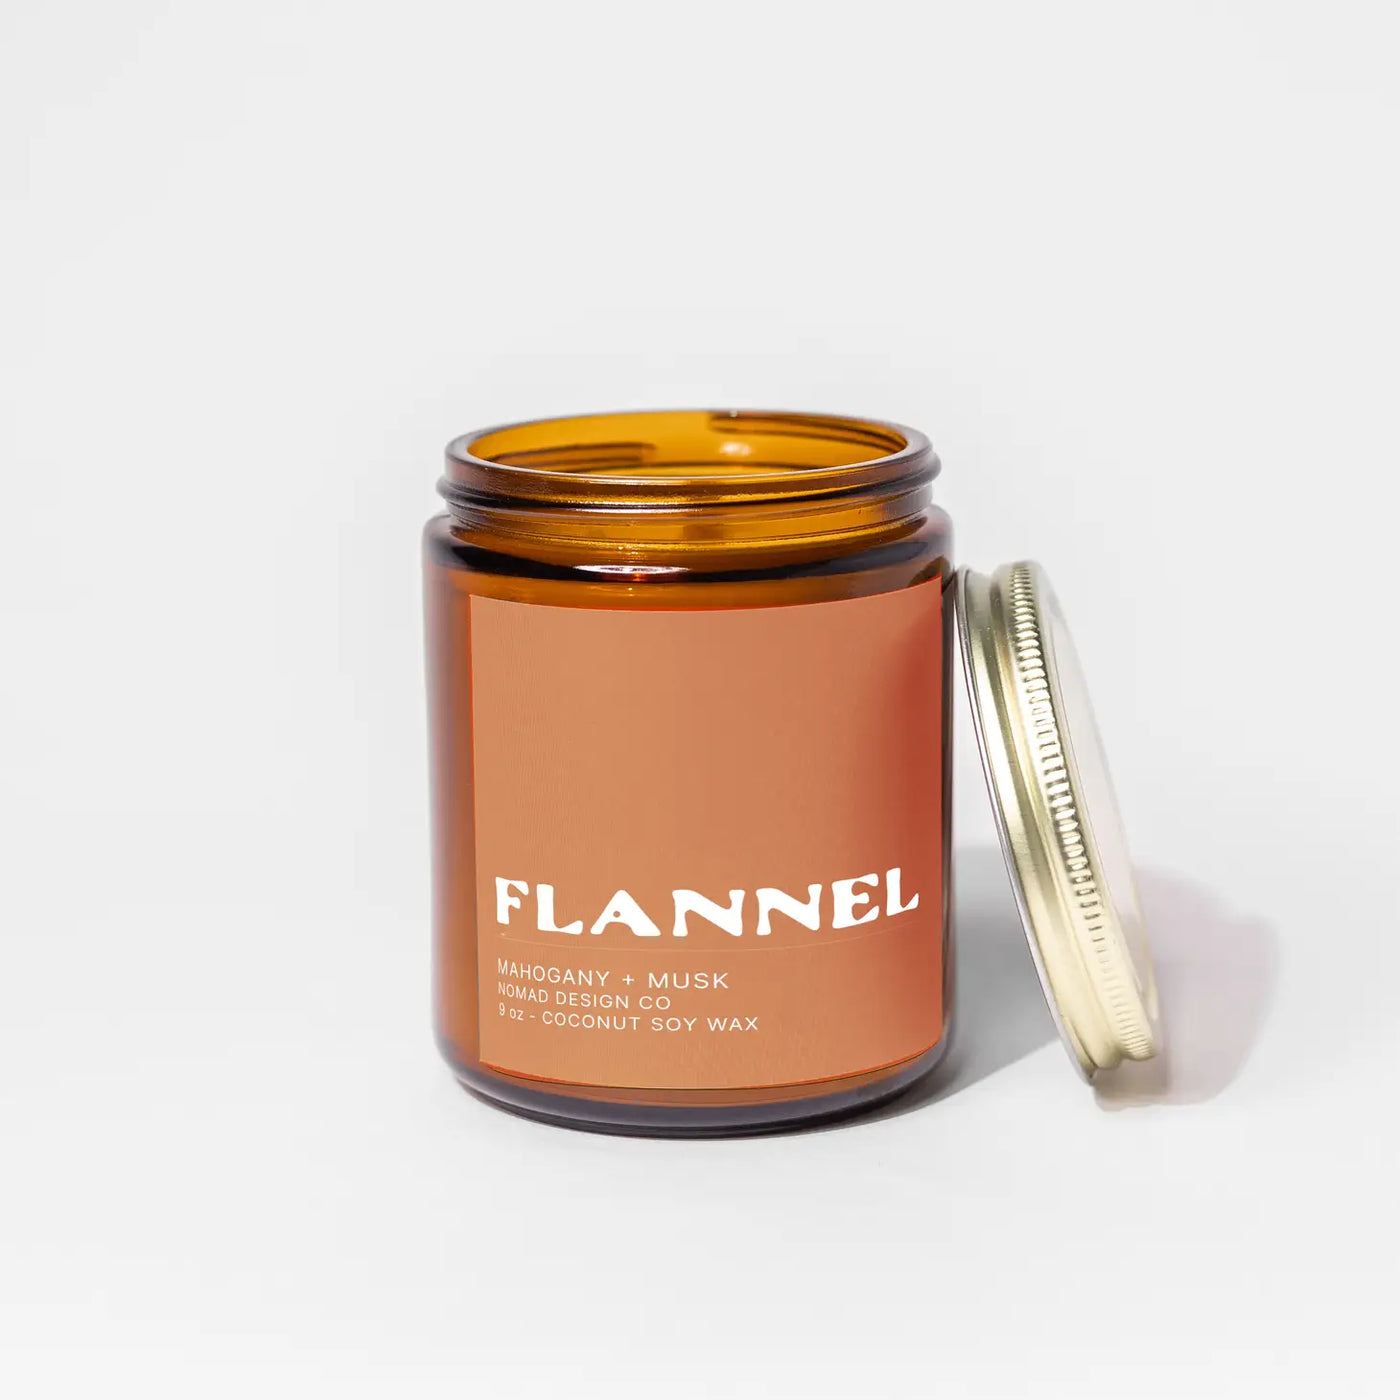 Flannel Candle by Nomad Design